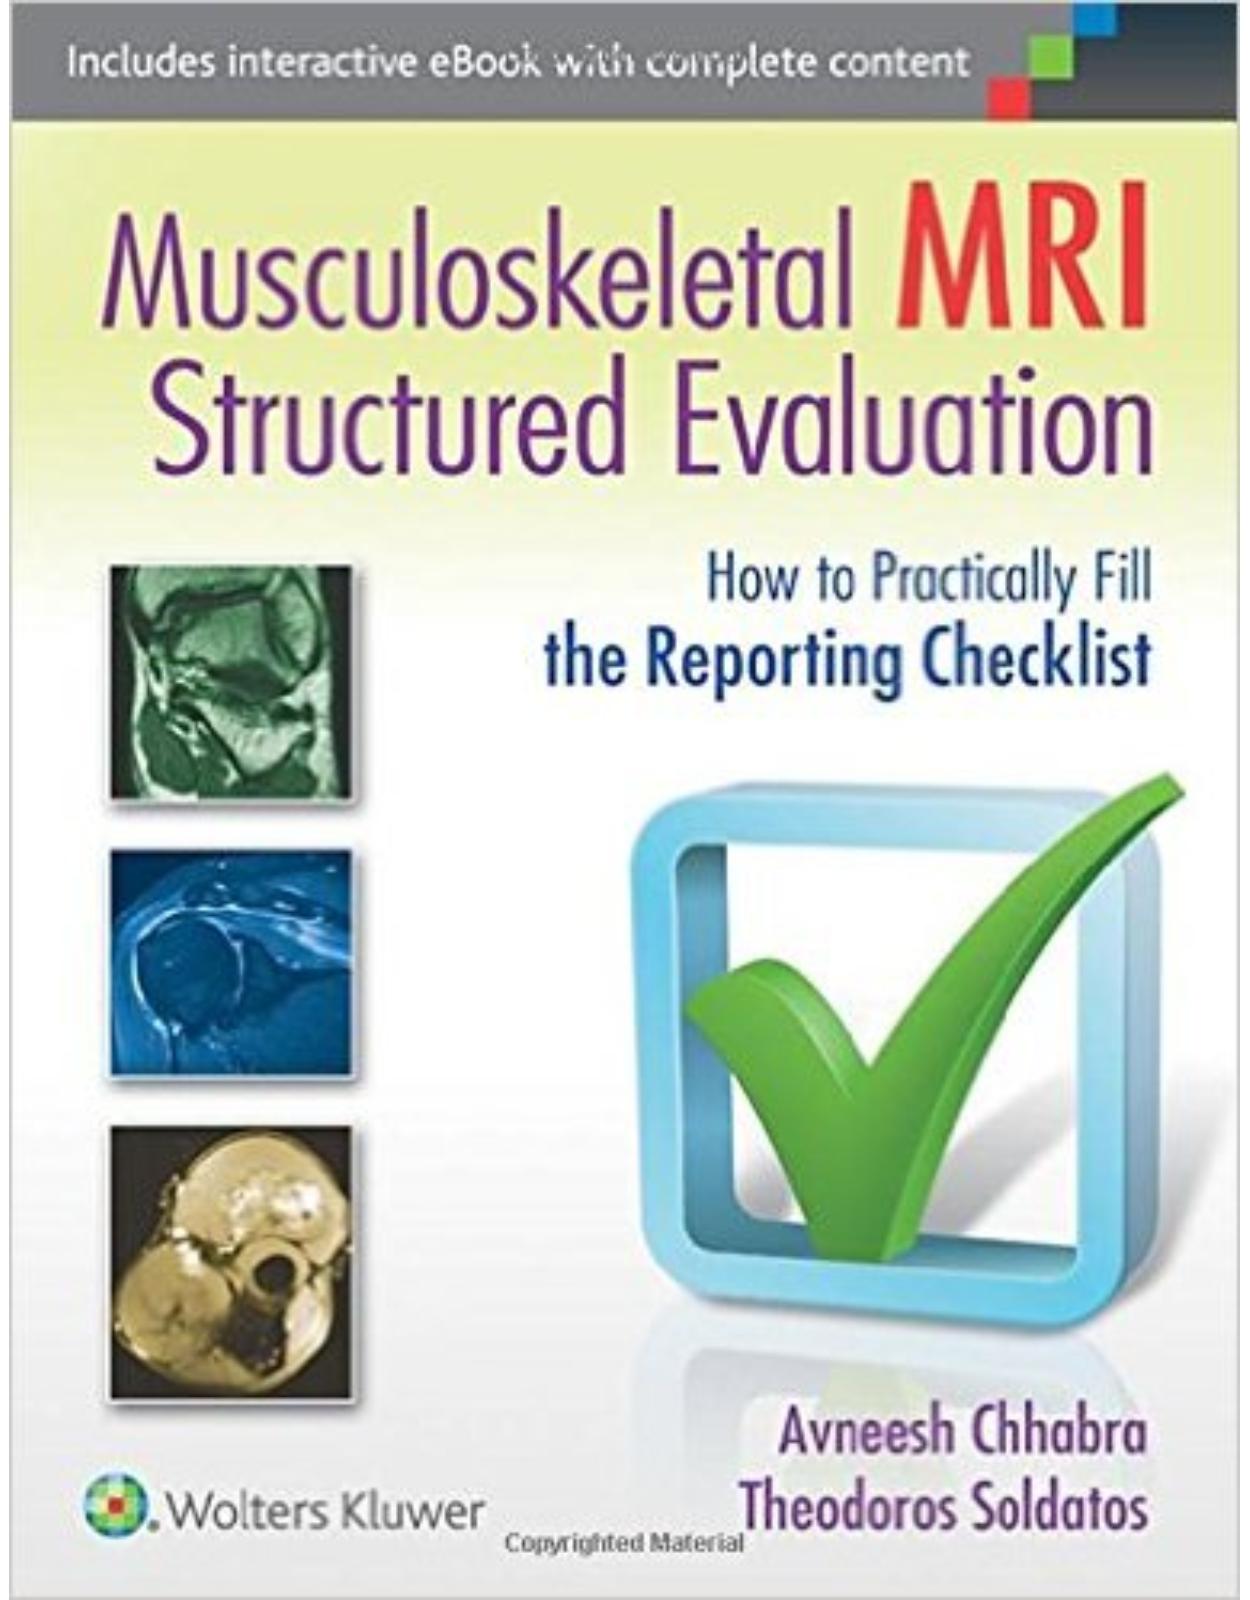 Musculoskeletal MRI Structured Evaluation: How to Practically Fill the Reporting Checklist 1 Har/Psc Edition